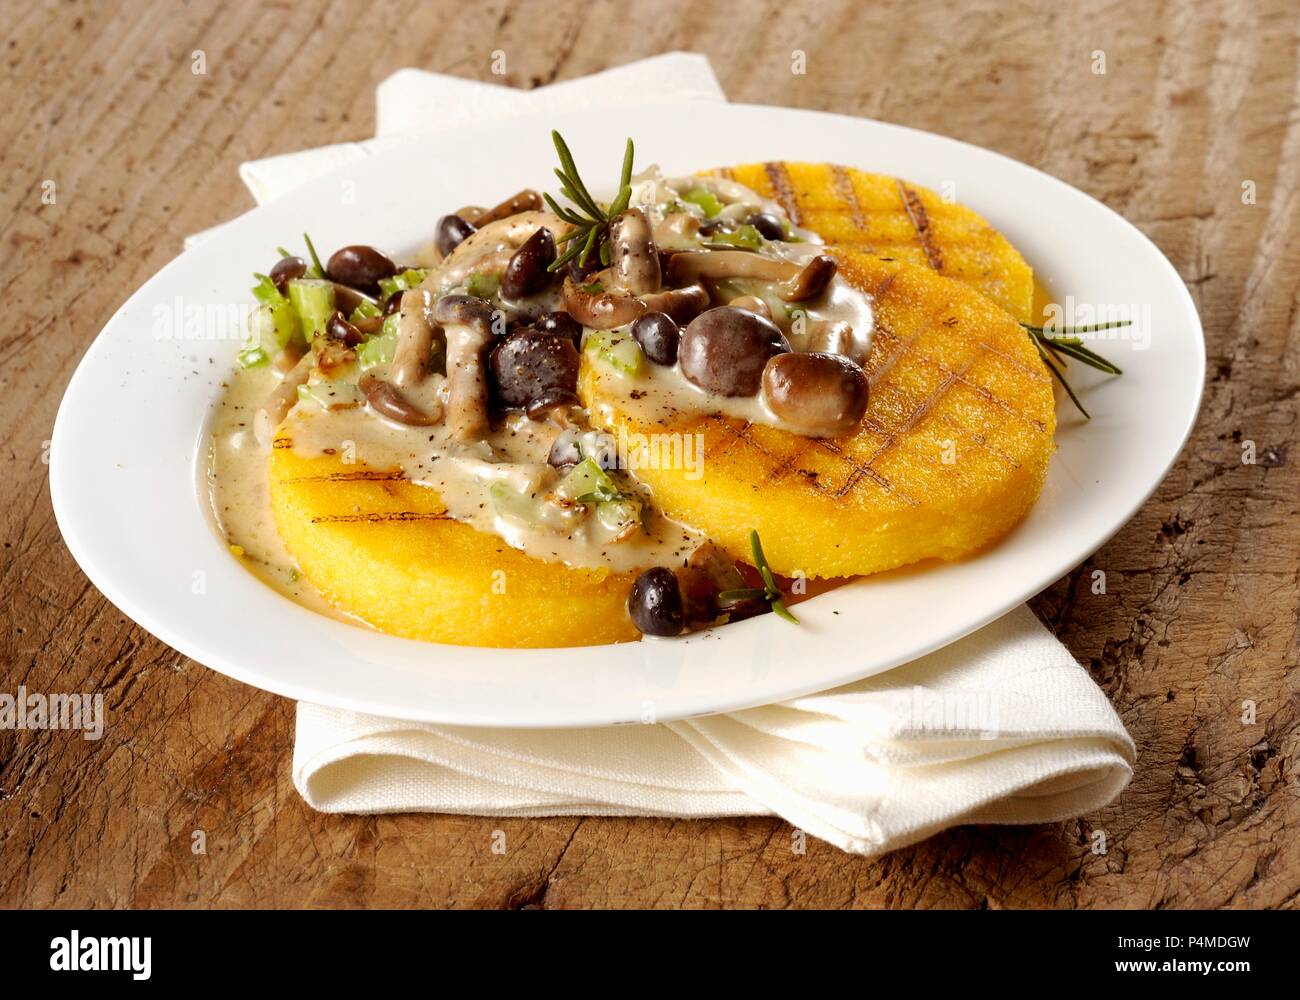 Grilled polenta with mushrooms and rosemary Stock Photo